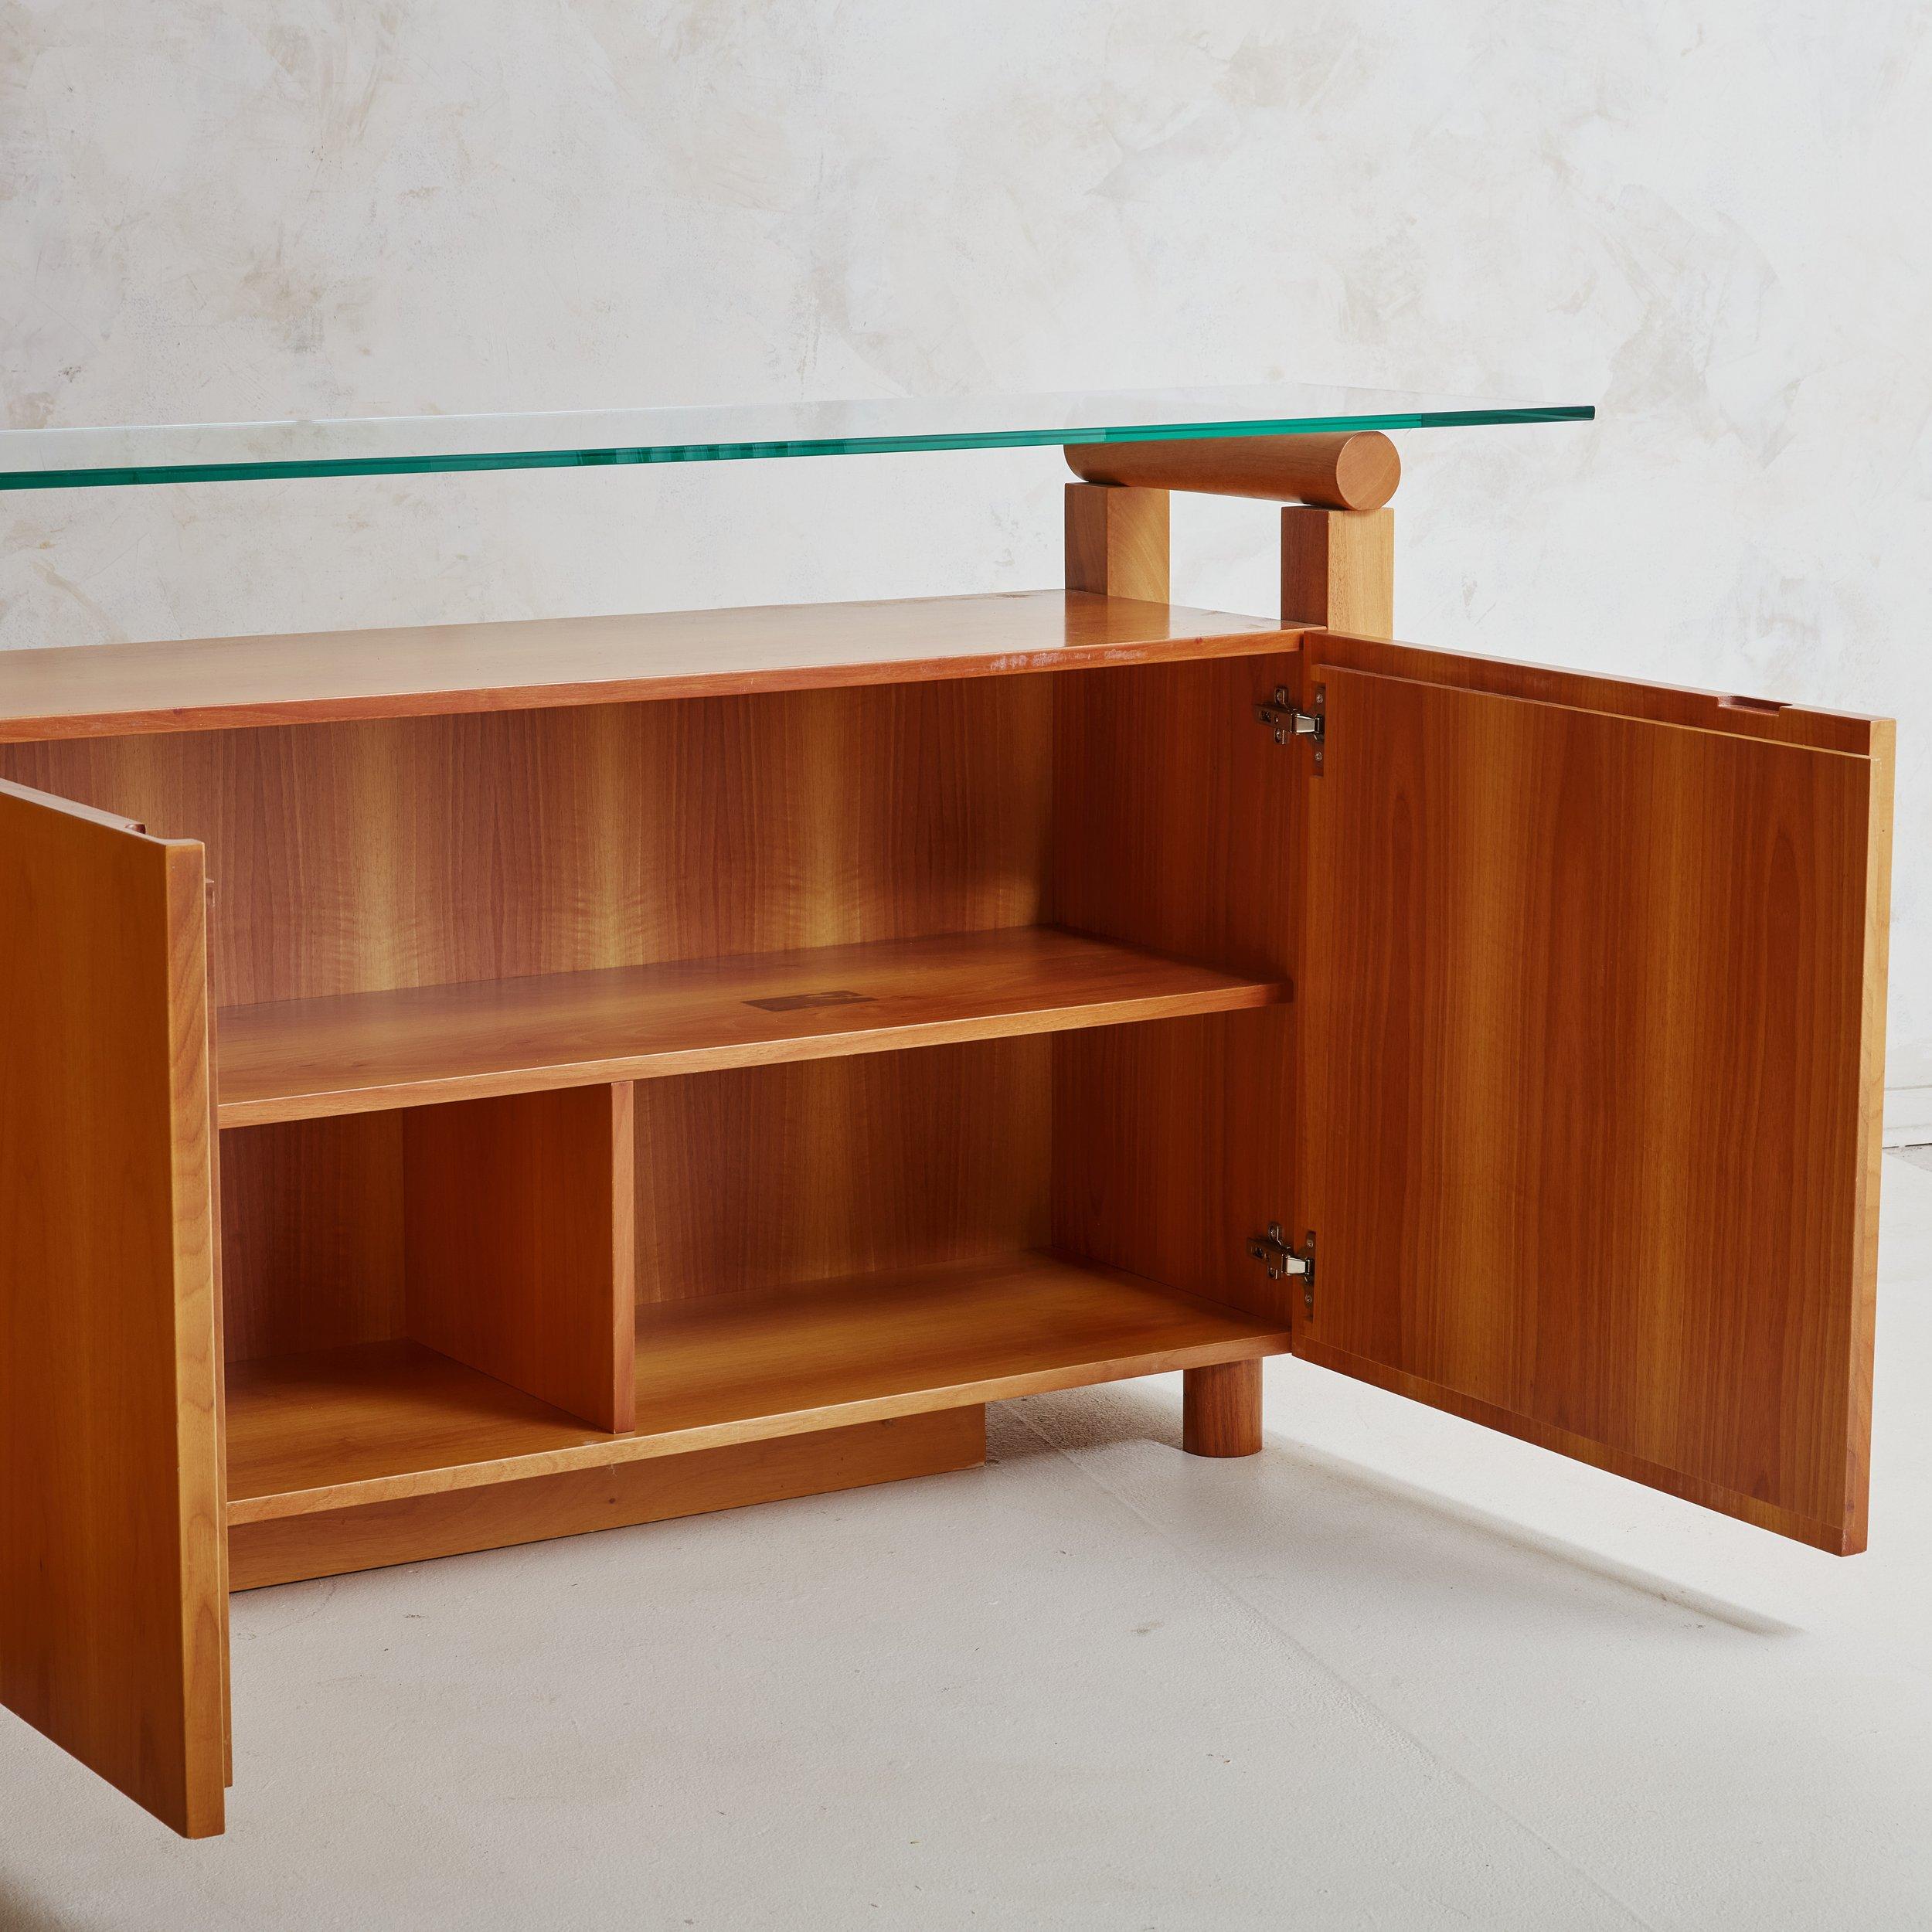 Italian Credenza with Glass Shelf, 1980s For Sale 2